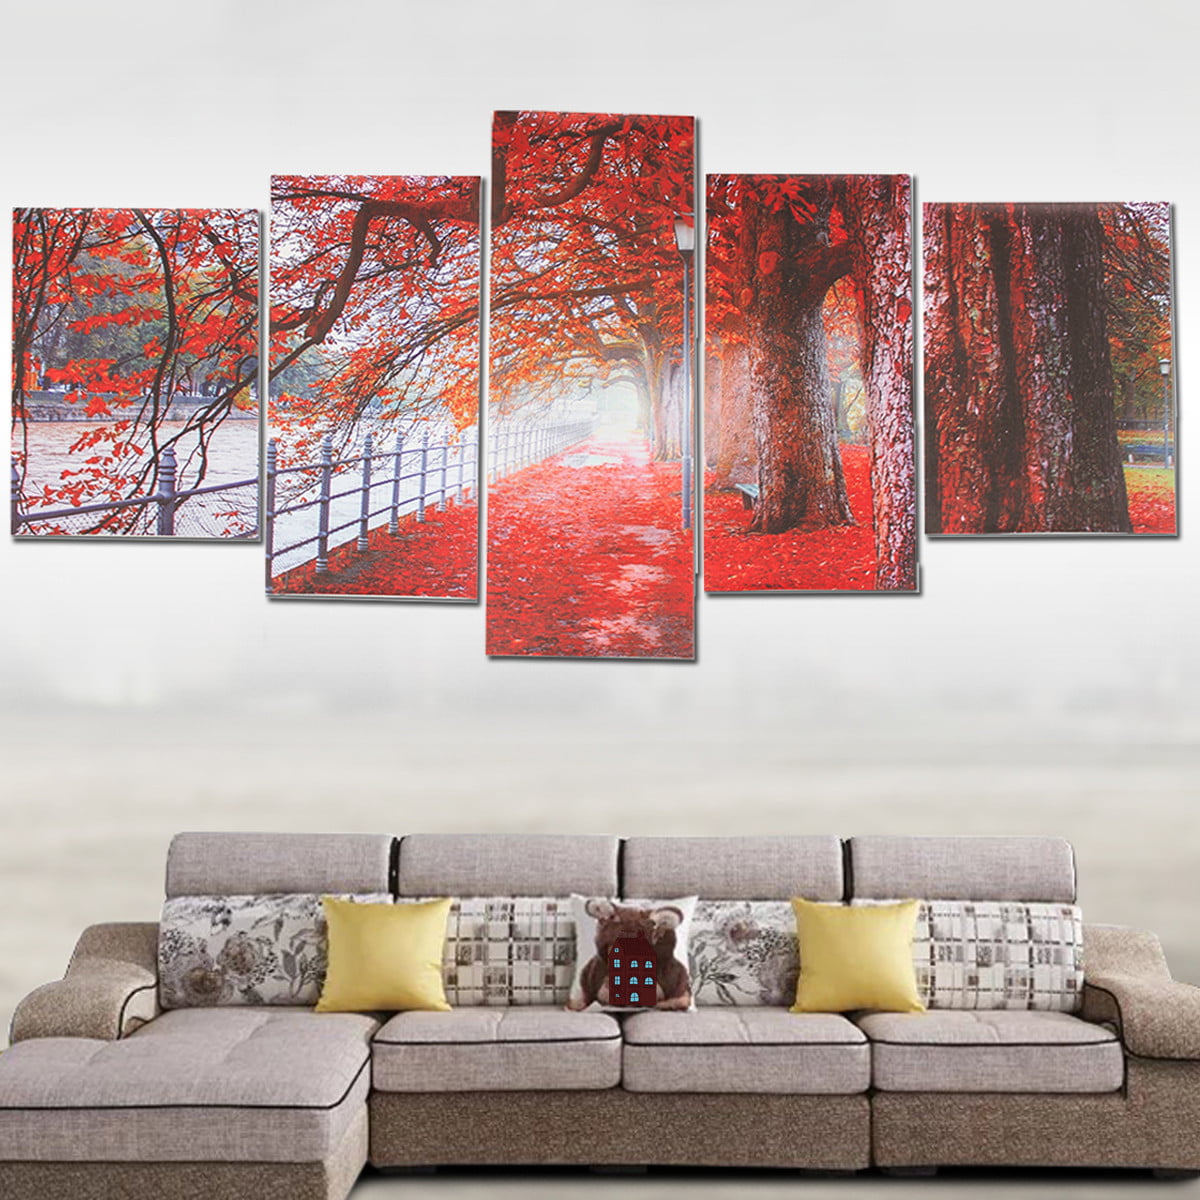 Modern Abstract Picture Kitchen Flavors Canvas Oil Painting Wall Decor Unframed 